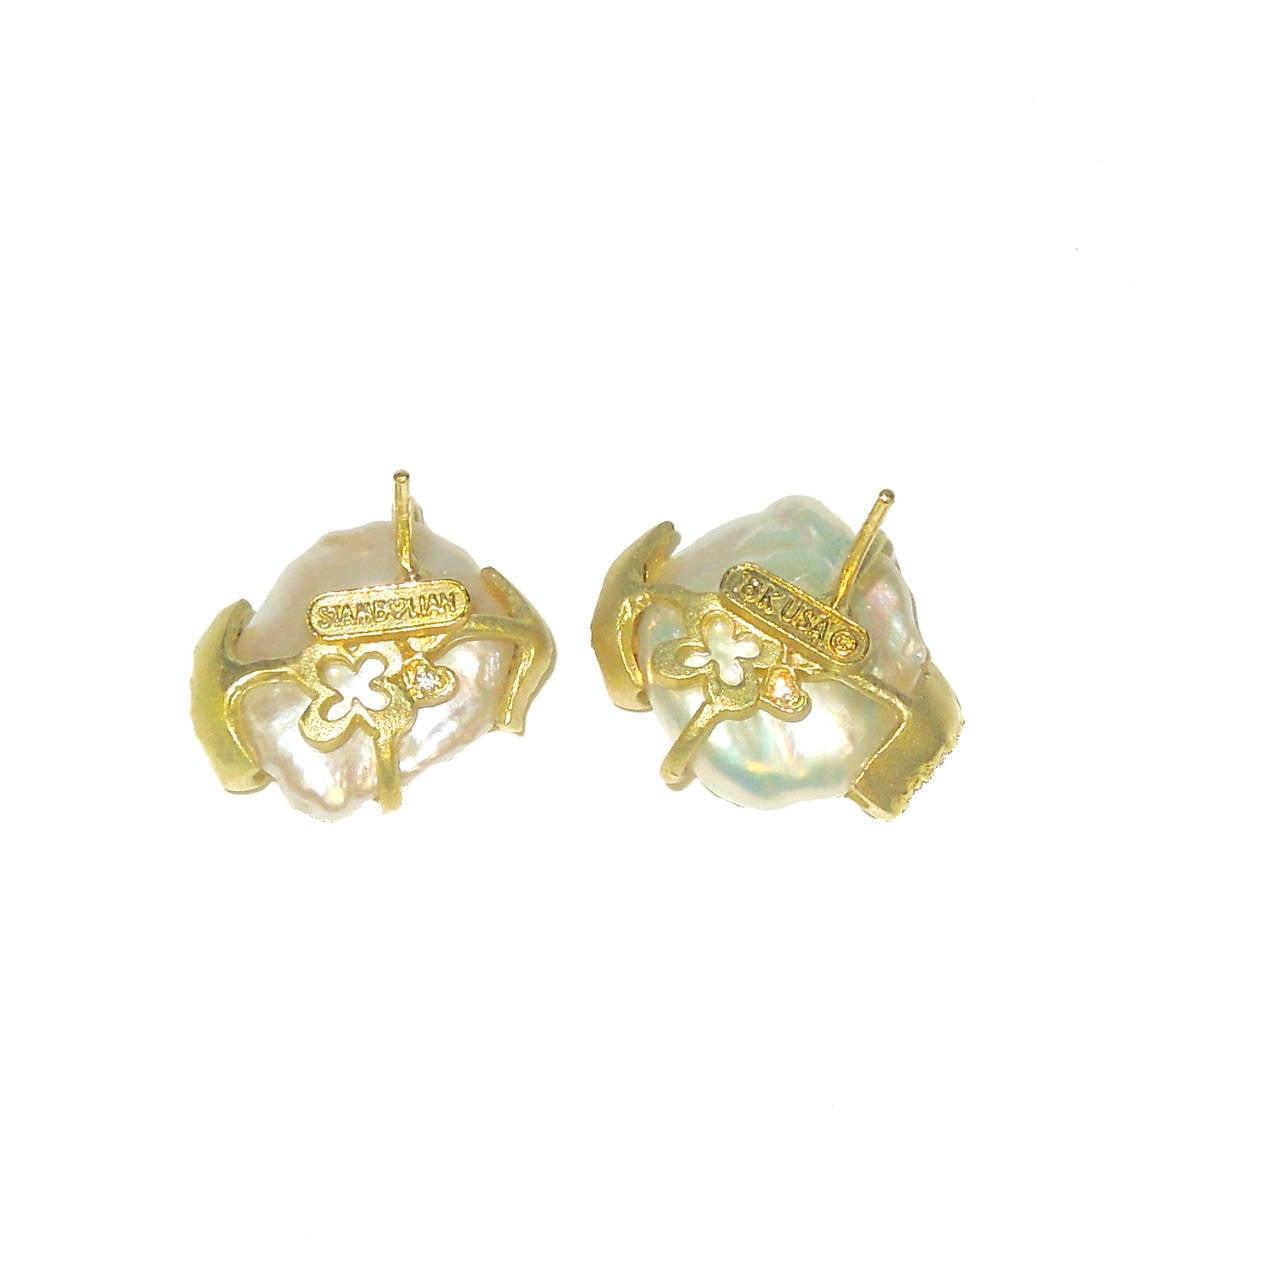 18K Gold Earrings with Kashi Pearl Centers w/ Gold & White Diamonds surrounding the pearls

Post back makes this a comfortable fit on your ear.

0.50 ct.'s of G Color, VS Quality Diamonds

Earrings are signed STAMBOLIAN with our Trademark